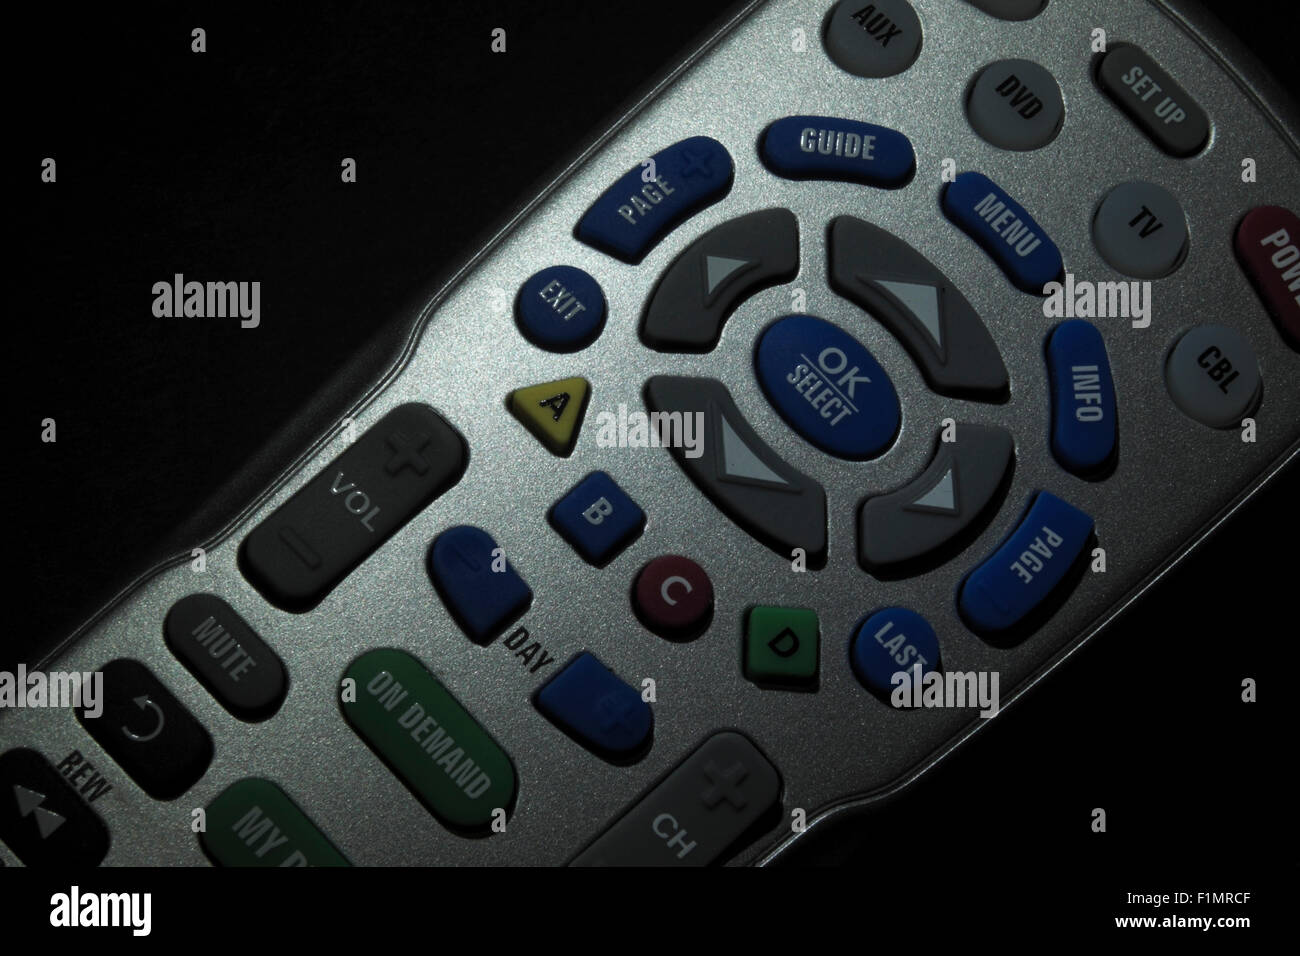 TV remote control device resting on a dark background in a spotlight. Stock Photo